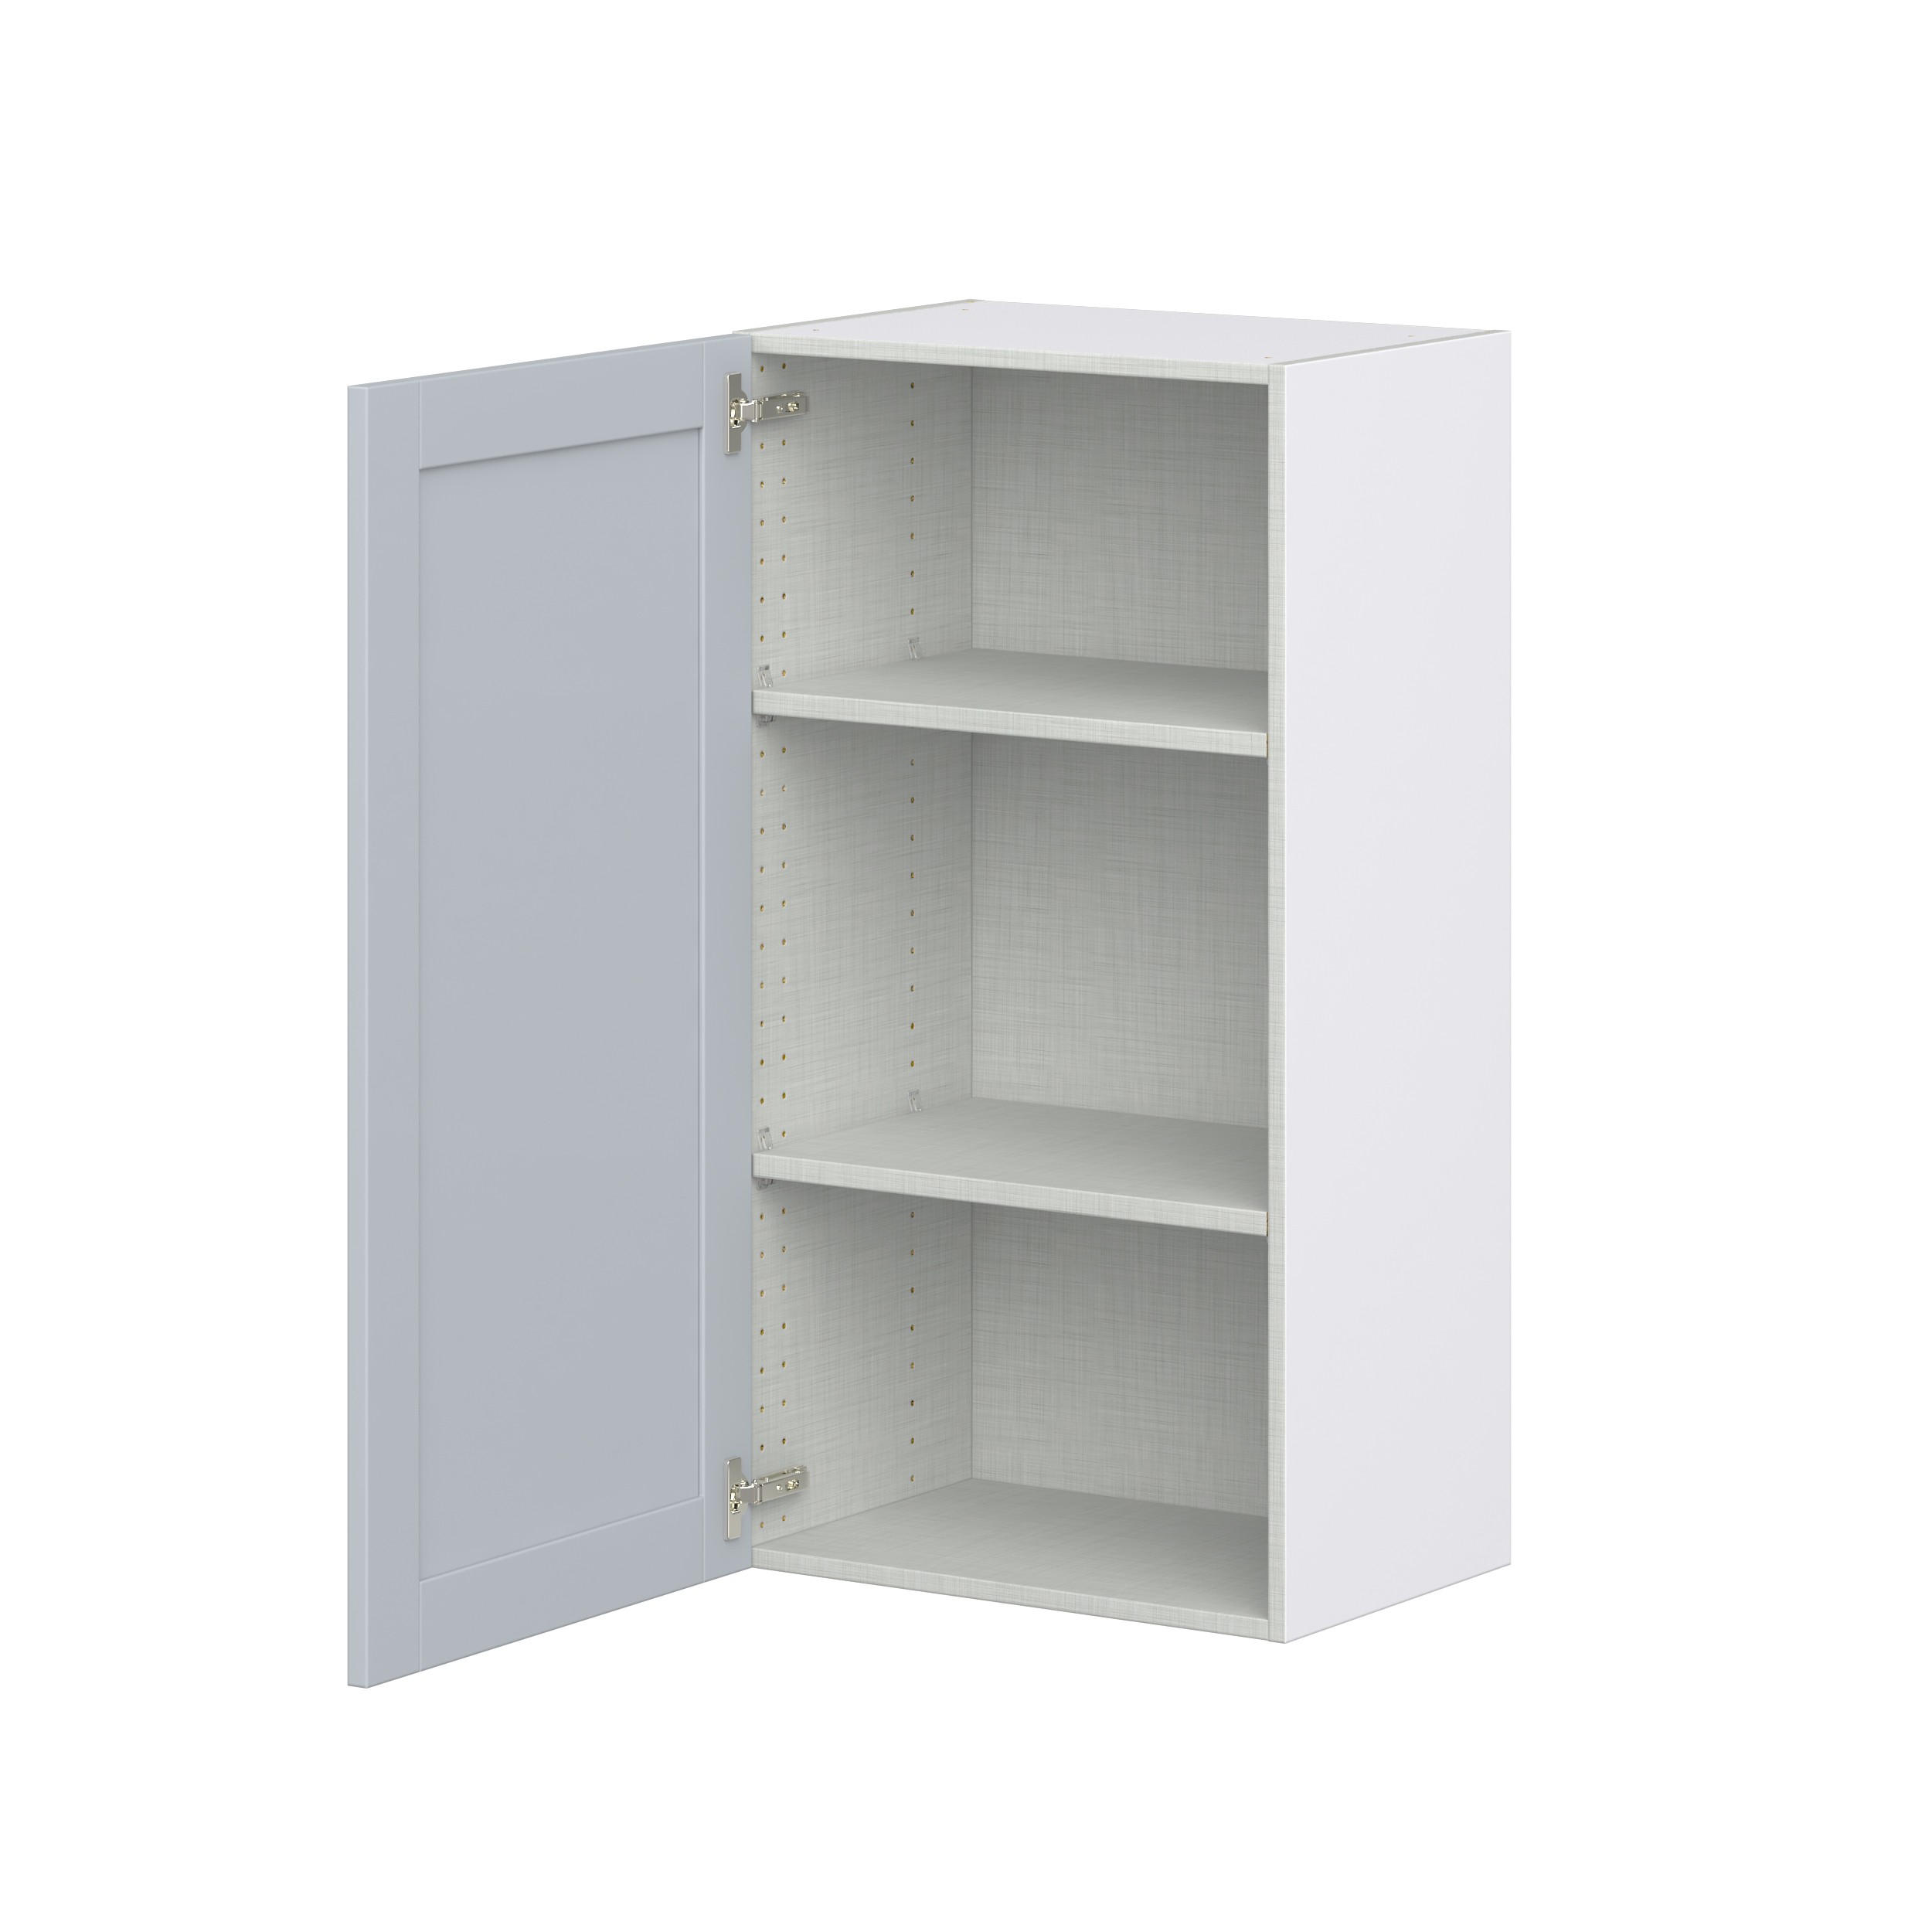 Sea Holly Light Gray Shaker Assembled Wall Cabinet with Full High Door (21 in. W x 40 in. H x 14 in. D)